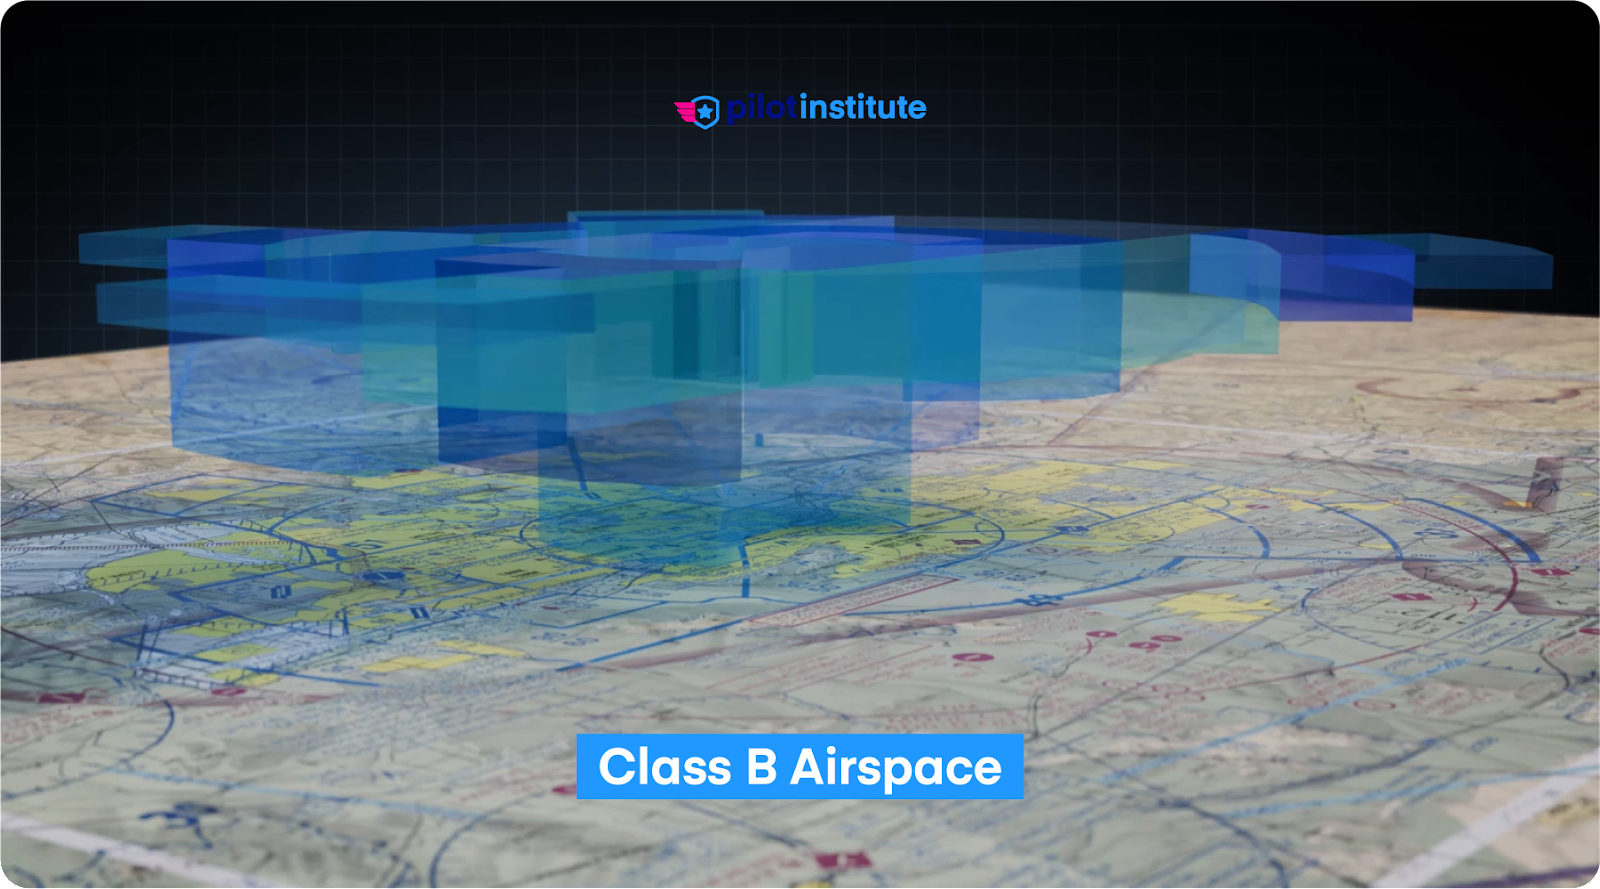 A 3D depiction of Class B airspace.